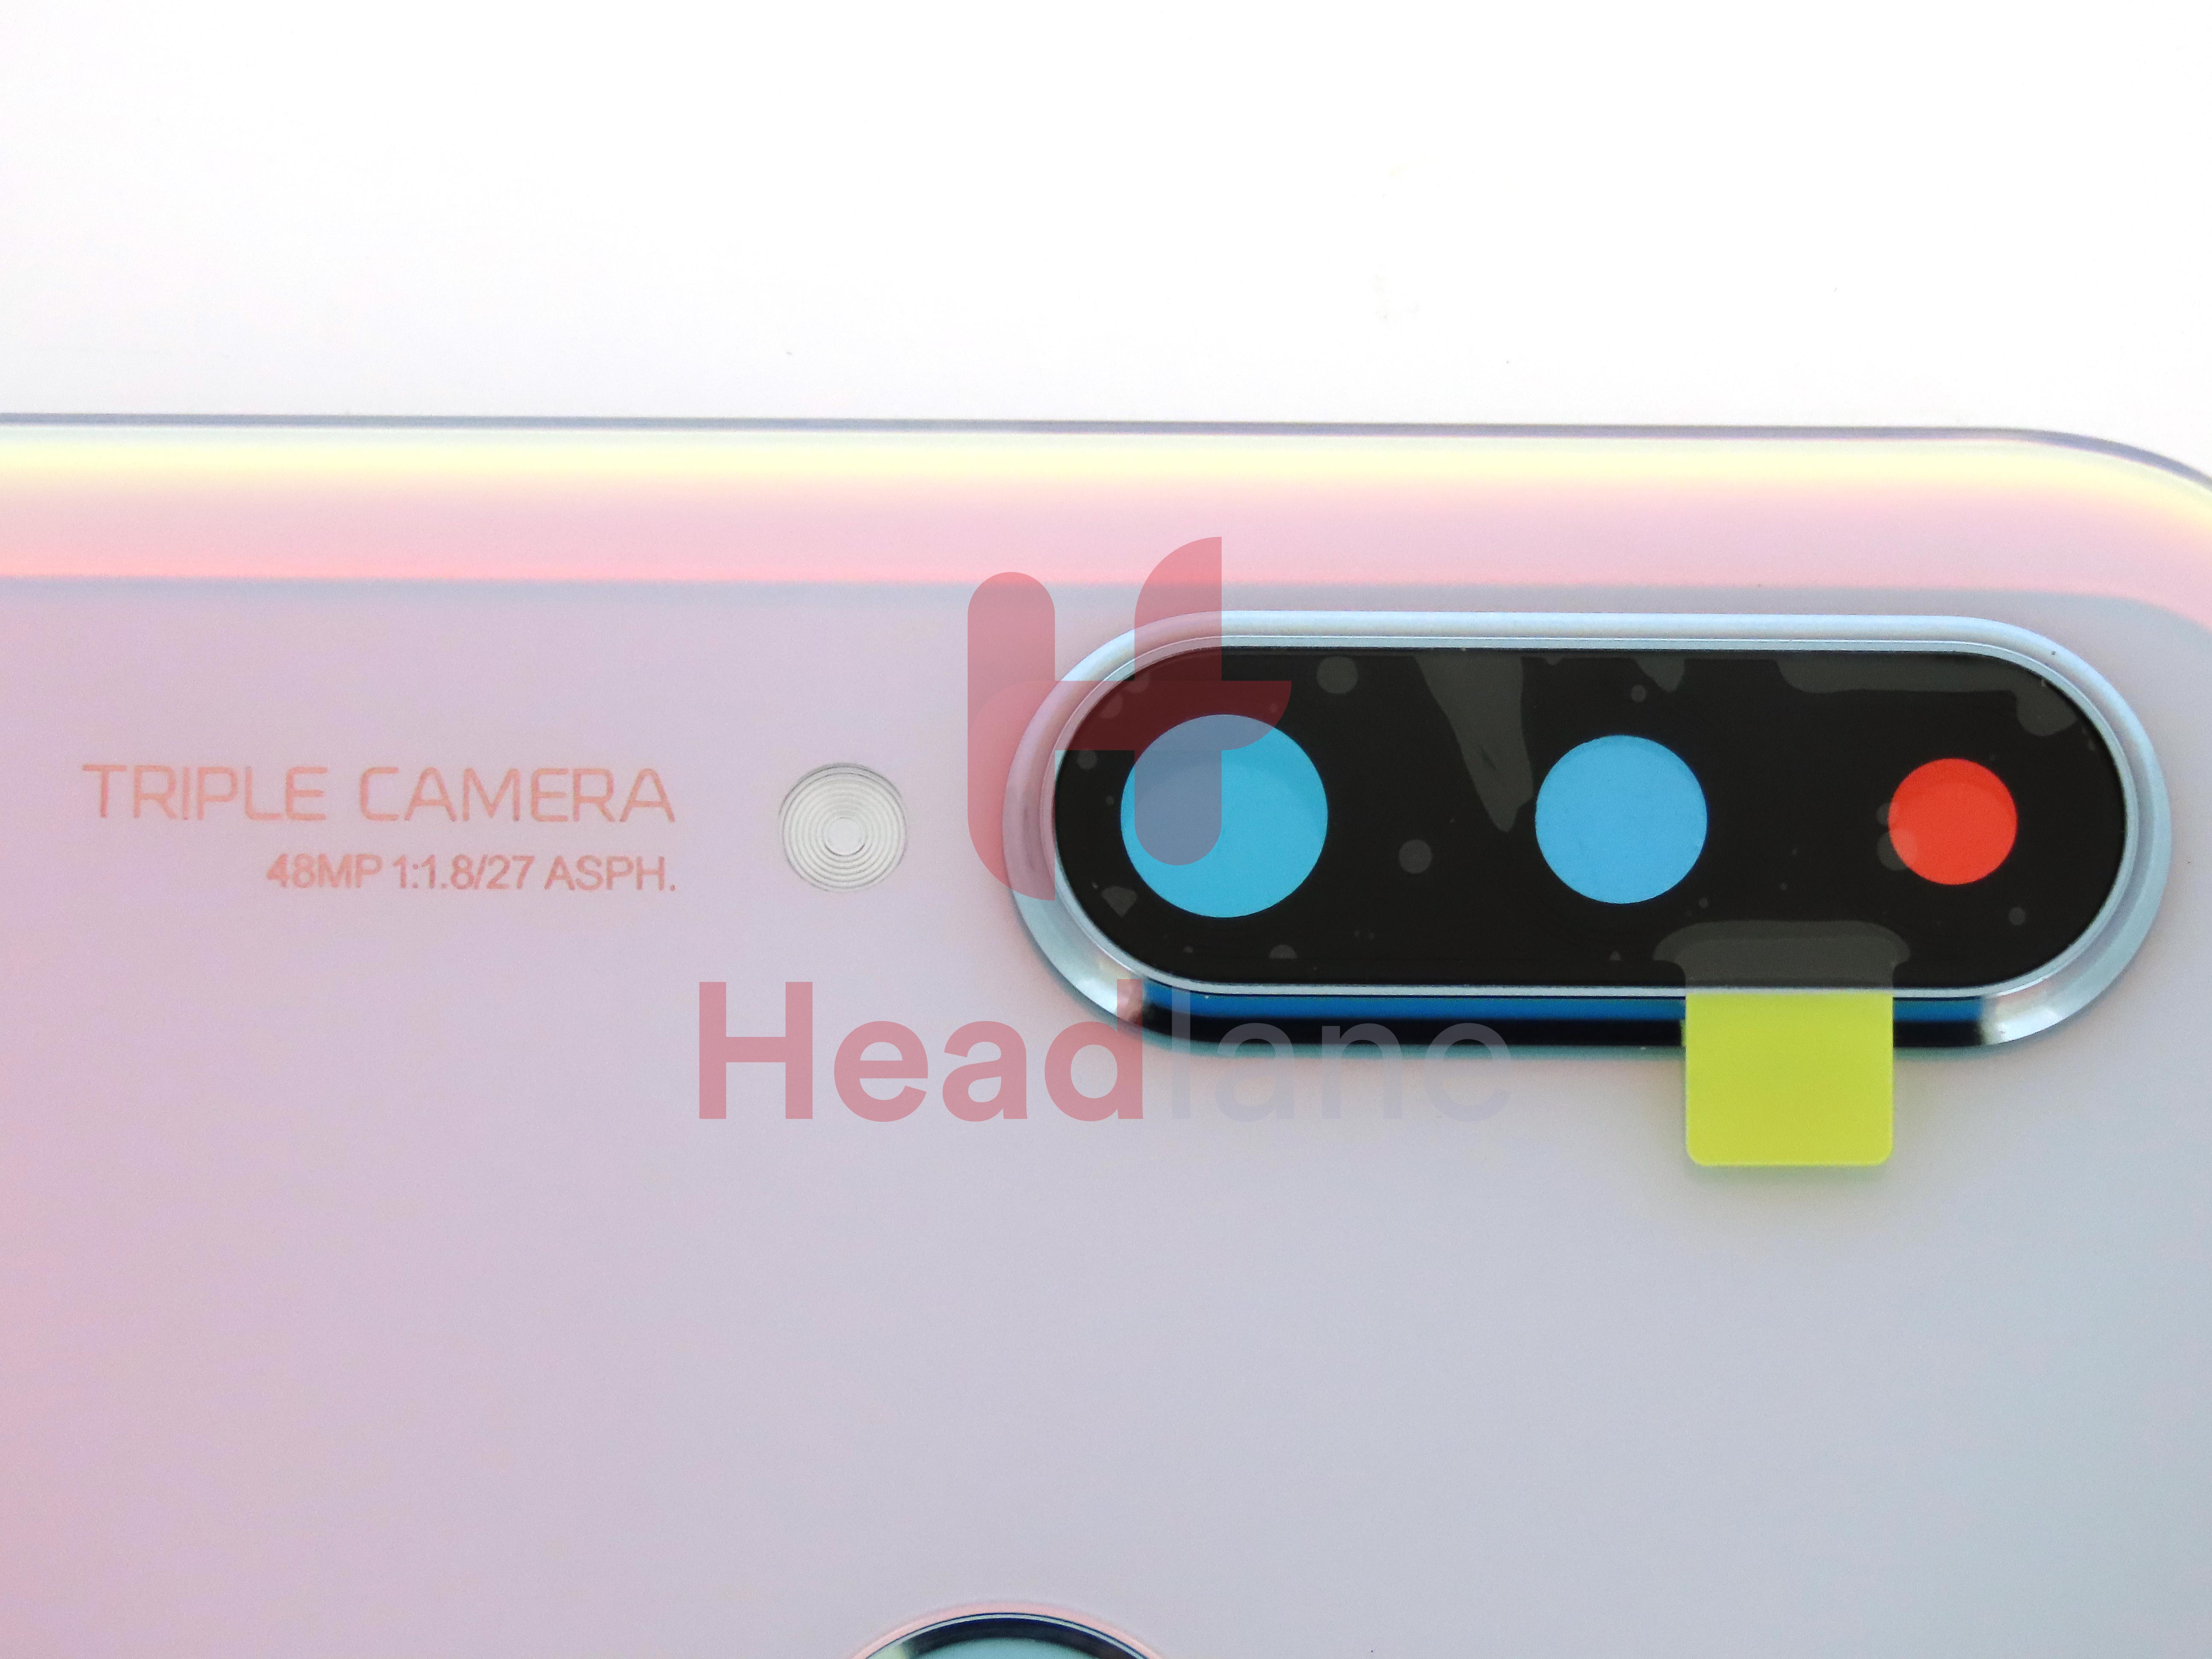 Huawei P30 Lite Back / Battery Cover - Breathing Crystal (MAR-LX1A 48MP Rear Camera)